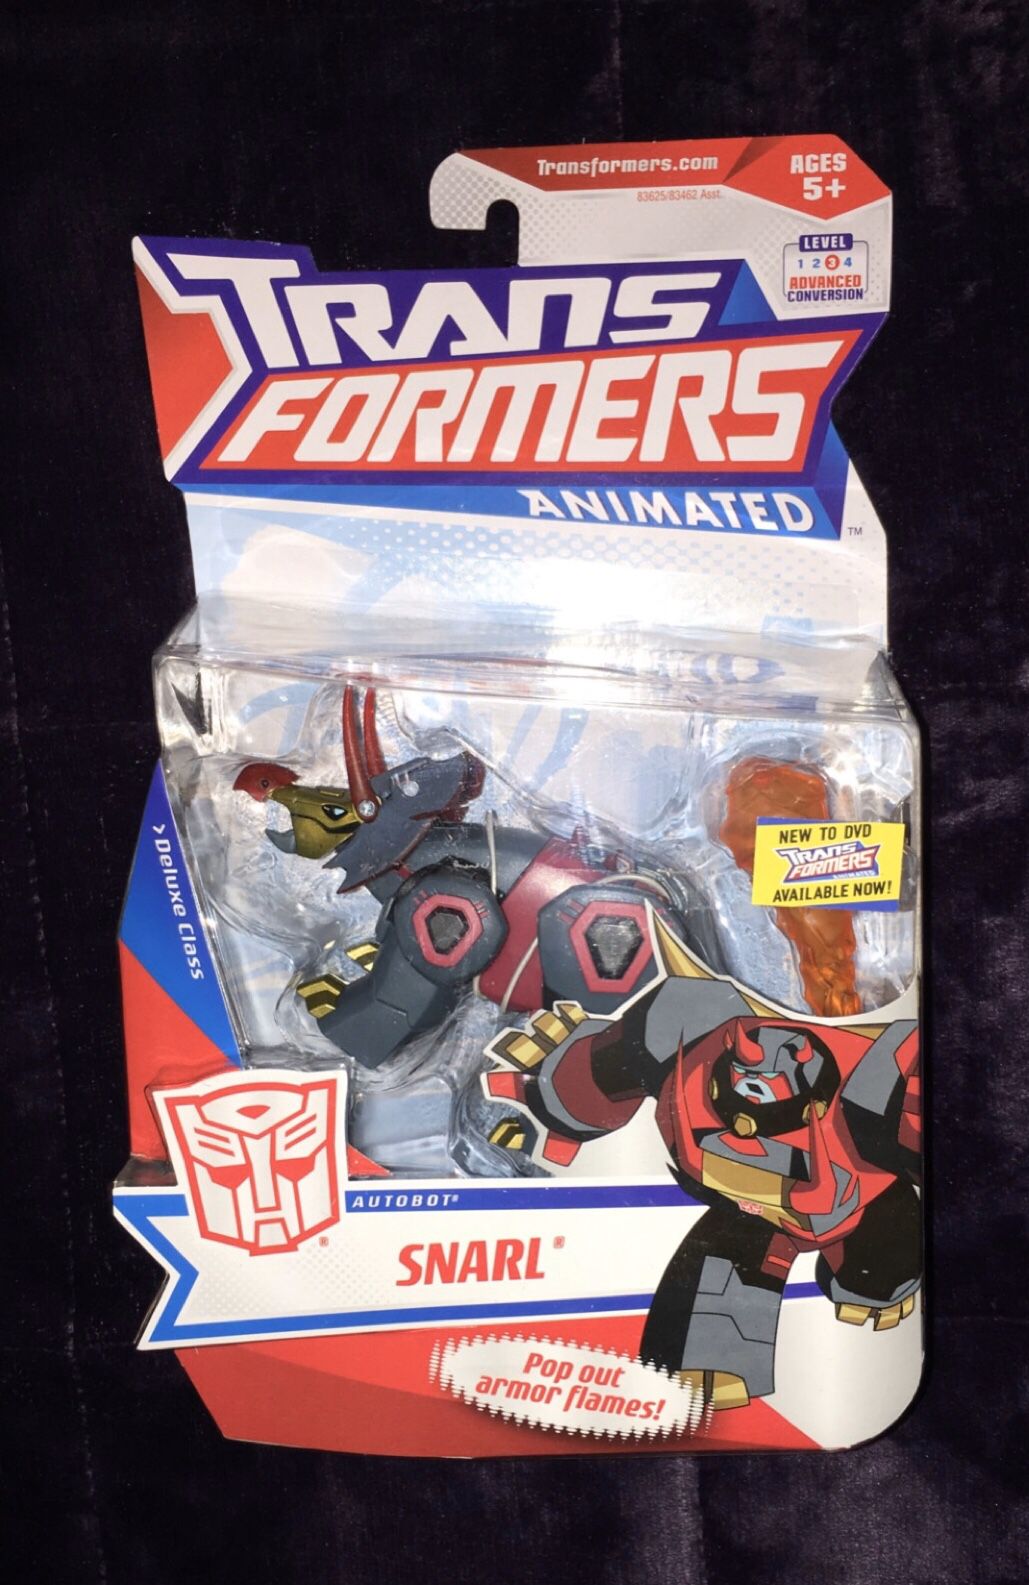 Hasbro Transformers Animaled Deluxe- Autobot Snarl Action Figure